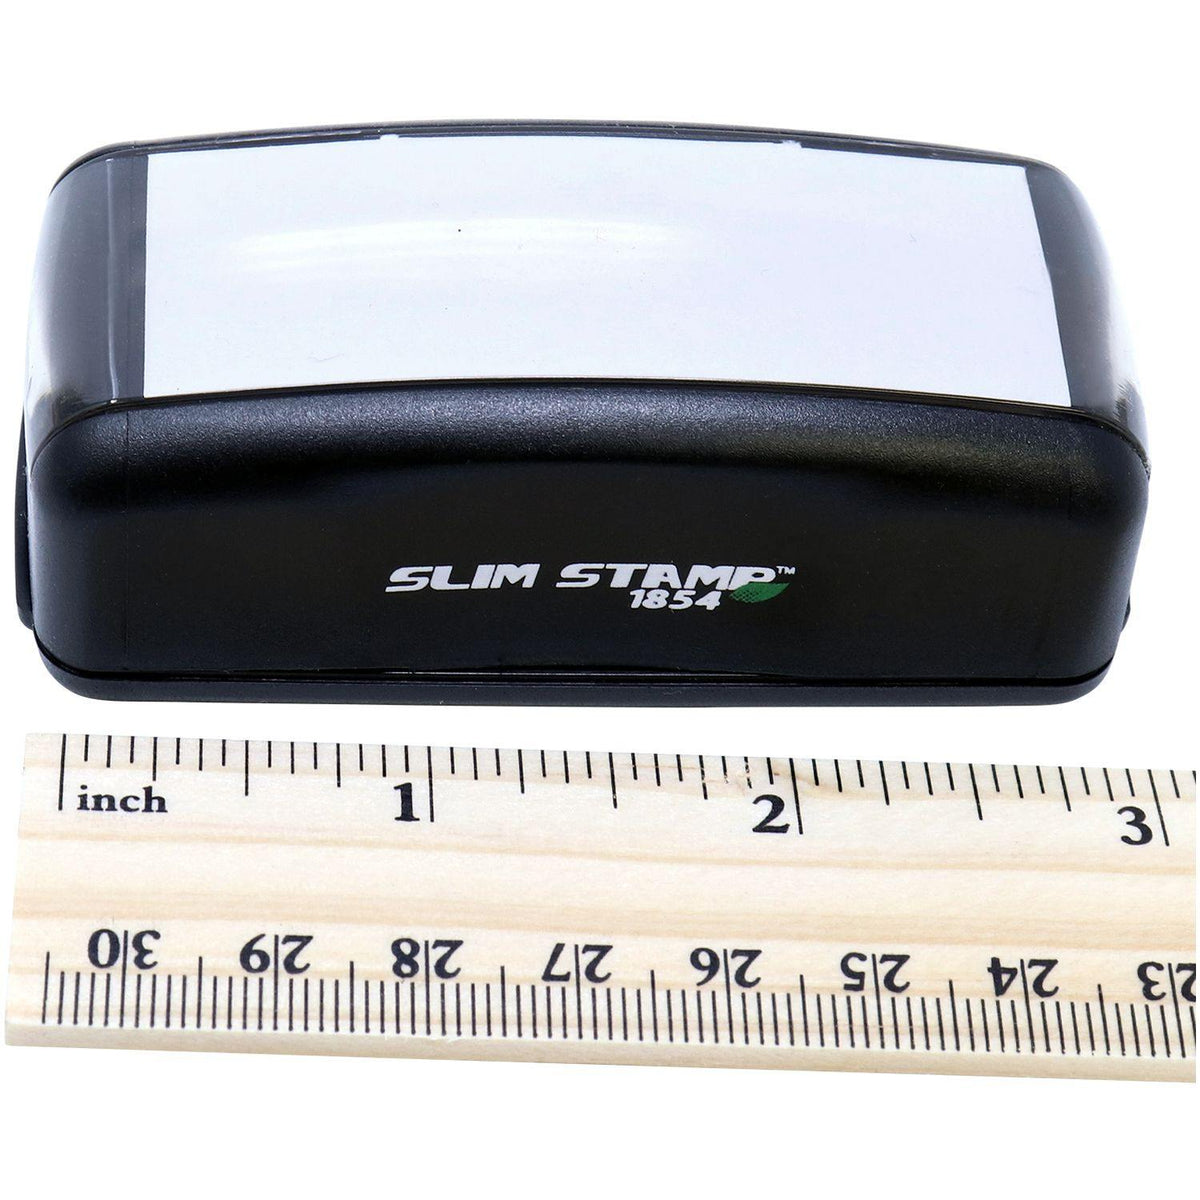 Measurement Large Pre-Inked Narrow Posted Stamp with Ruler